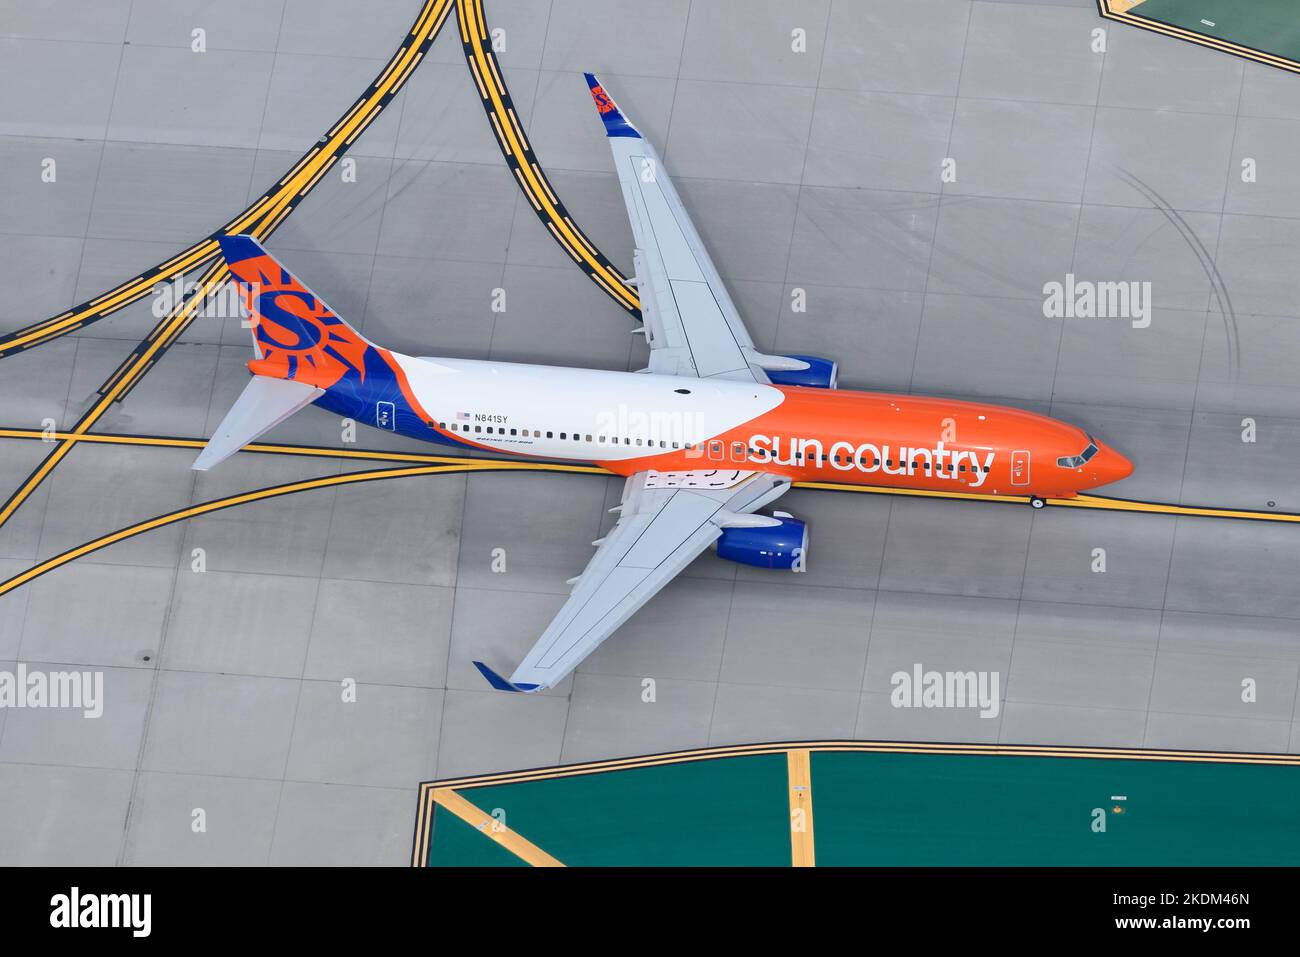 Sun Country Airlines Boeing 737 plane taxiing at airport. Airline SunCountry with 737-800 aircraft. Aircraft registered as N841SY. Stock Photo